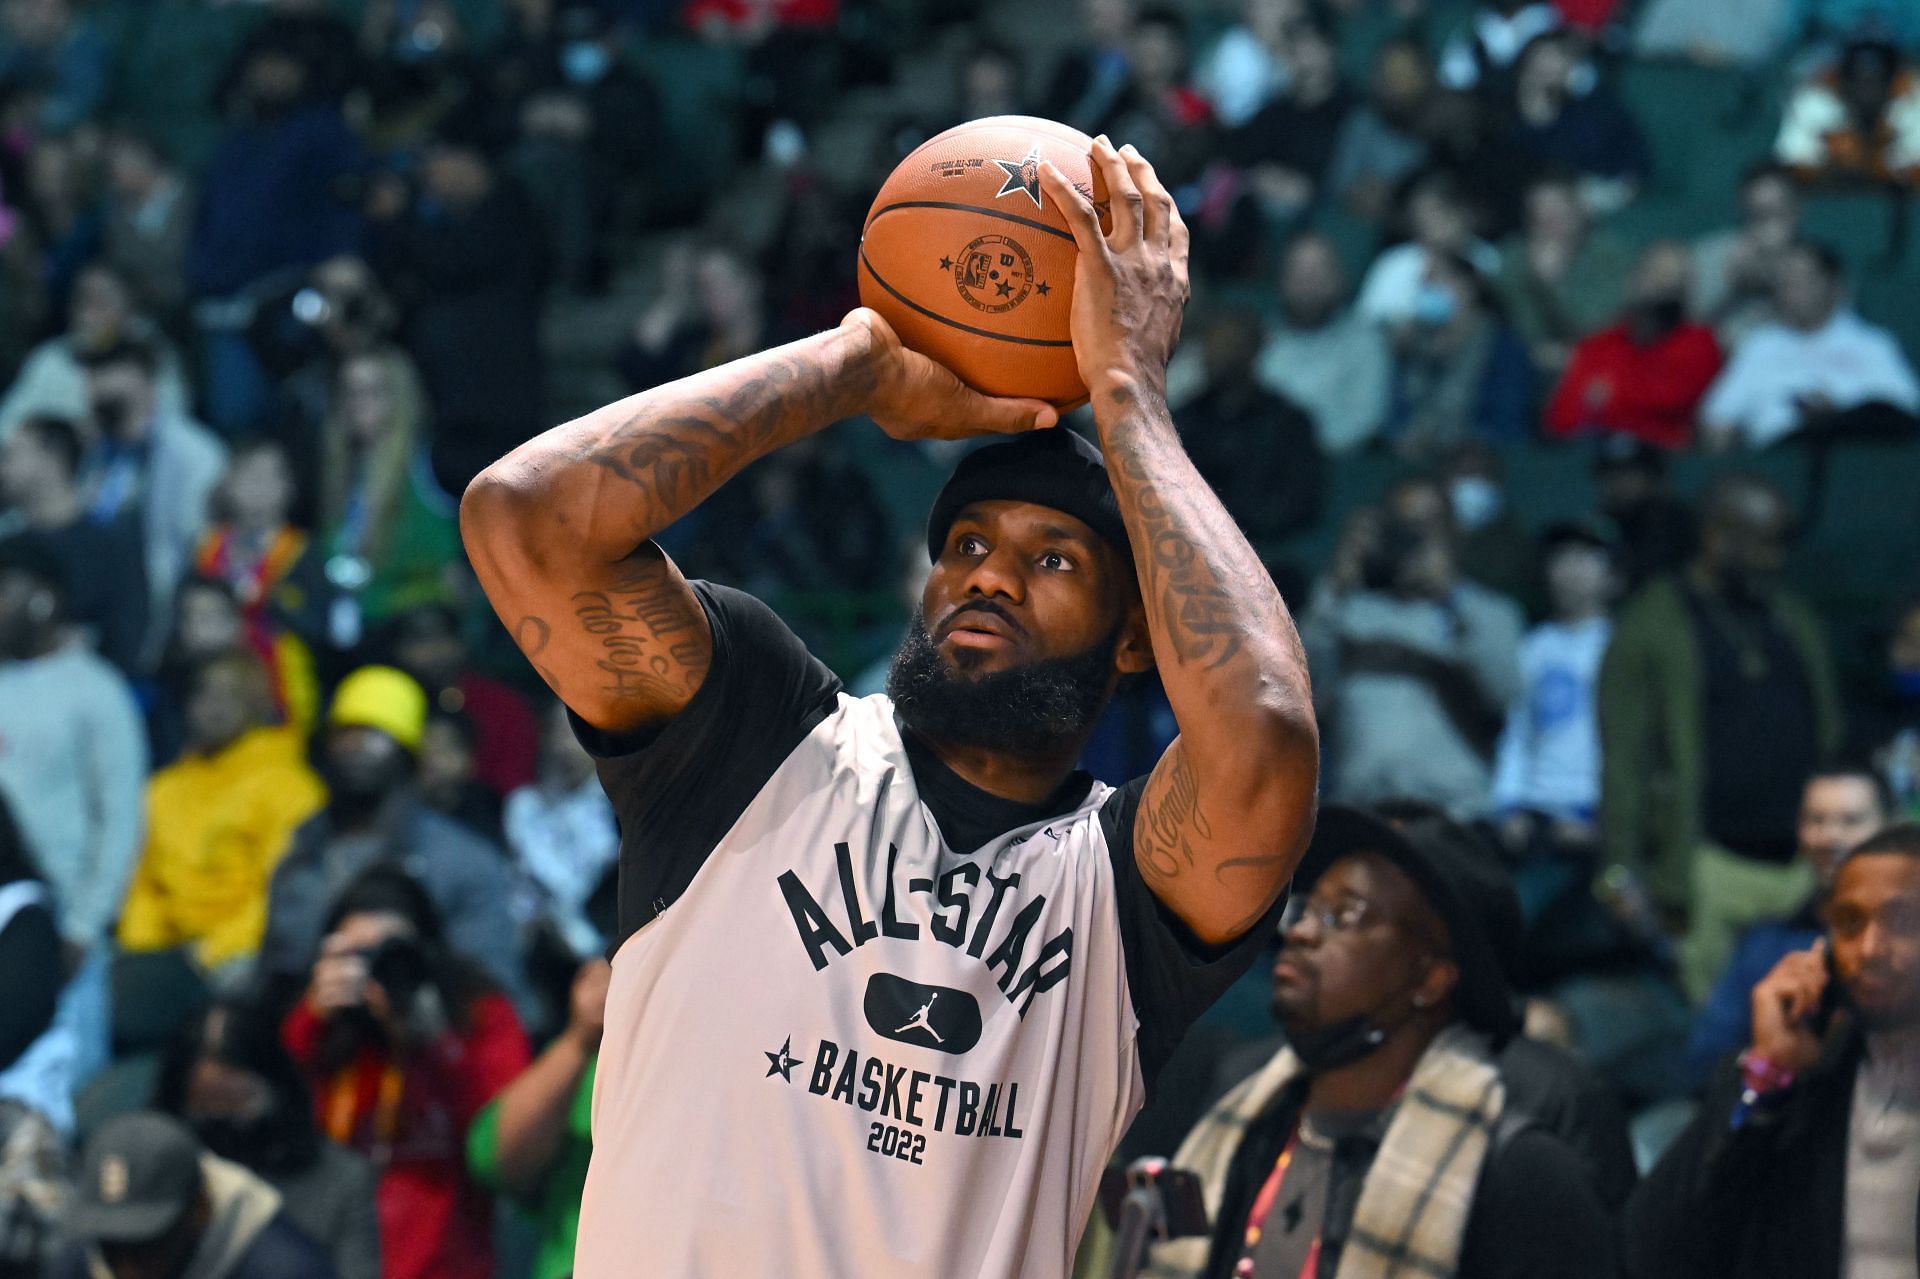 LeBron James attempts a shot at the NBA All-Star Practice.